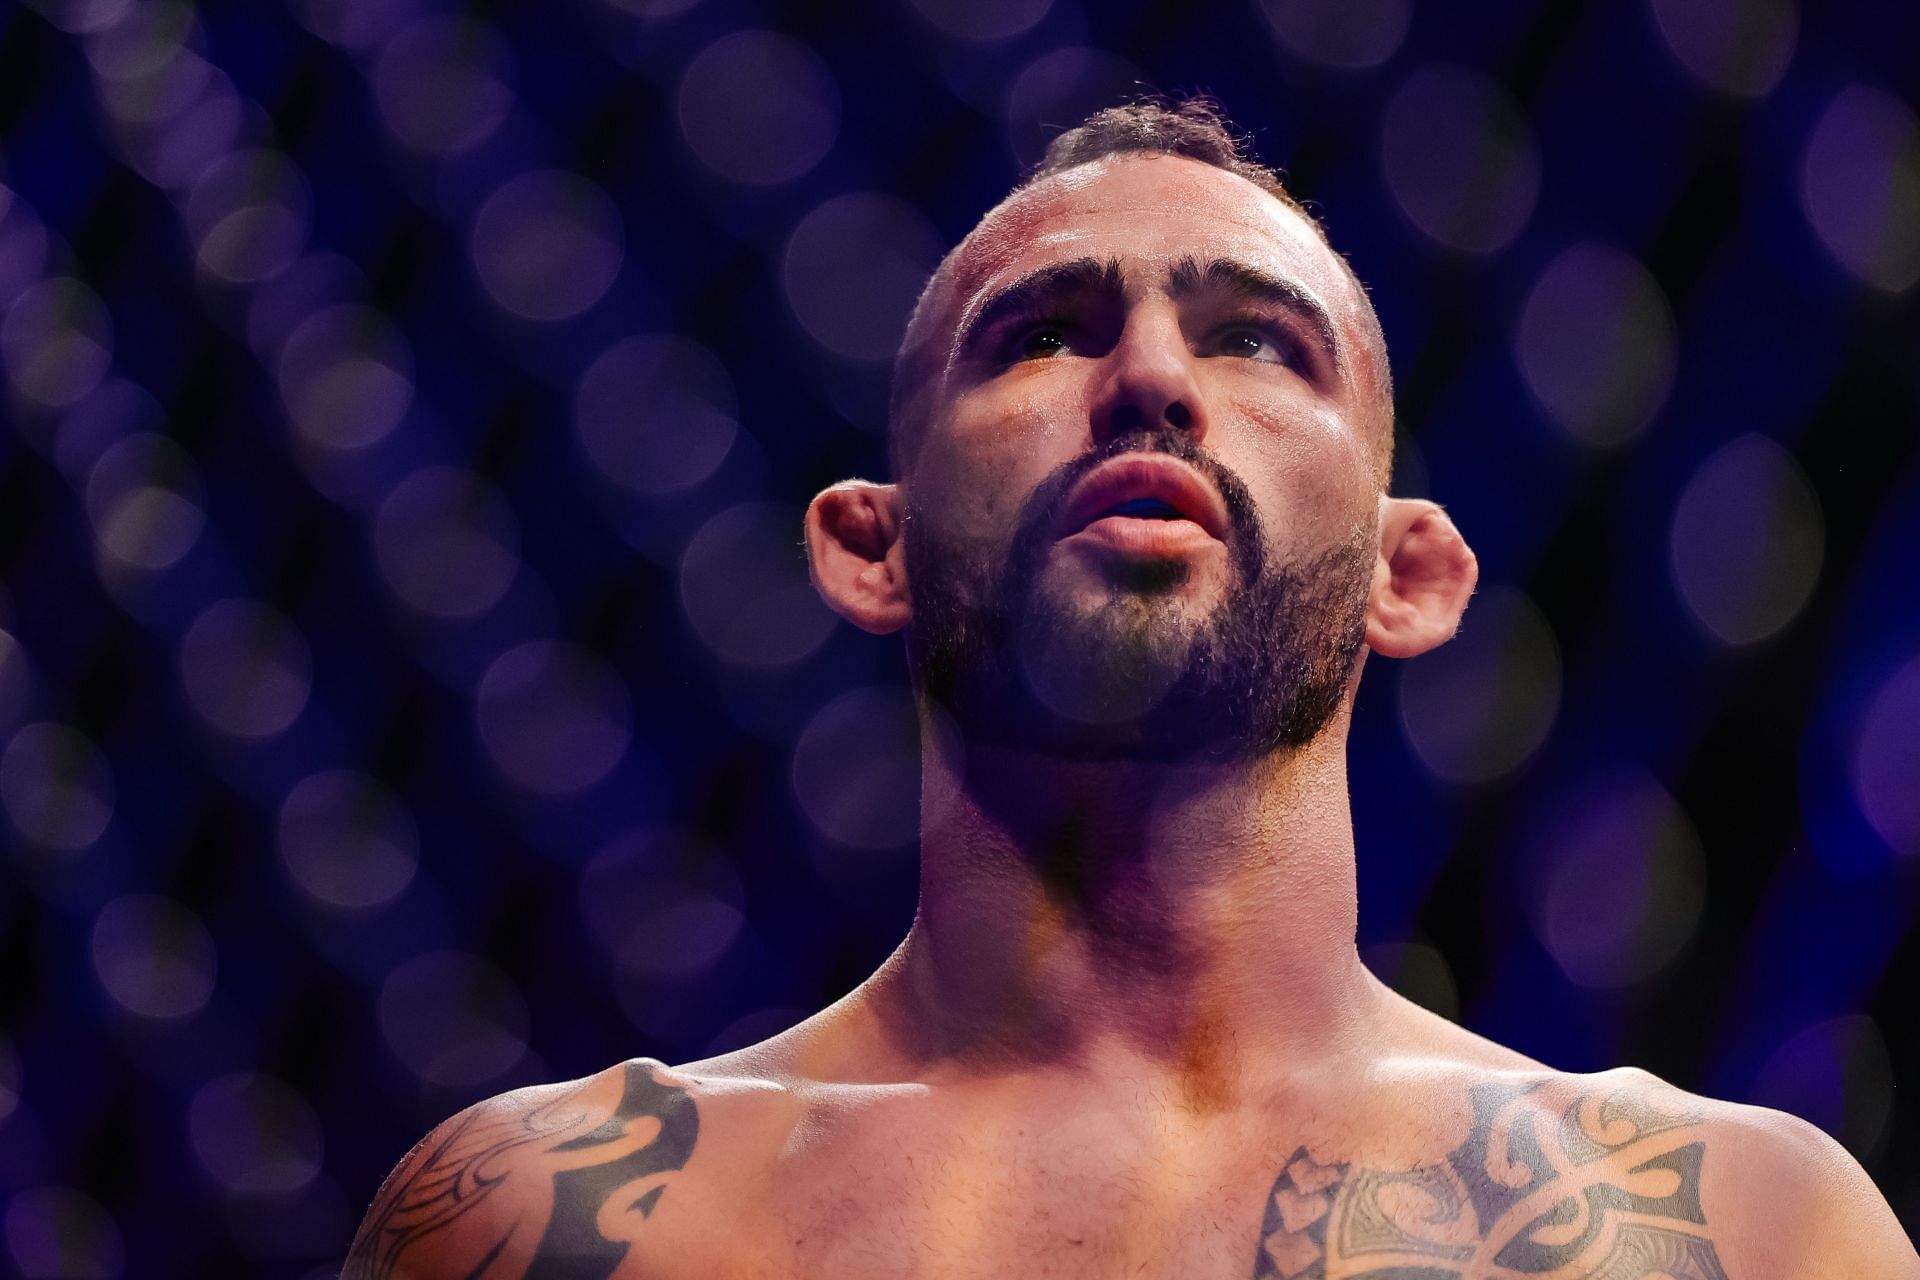 Ponzinibbio is ranked No.14 with a record of 28-5